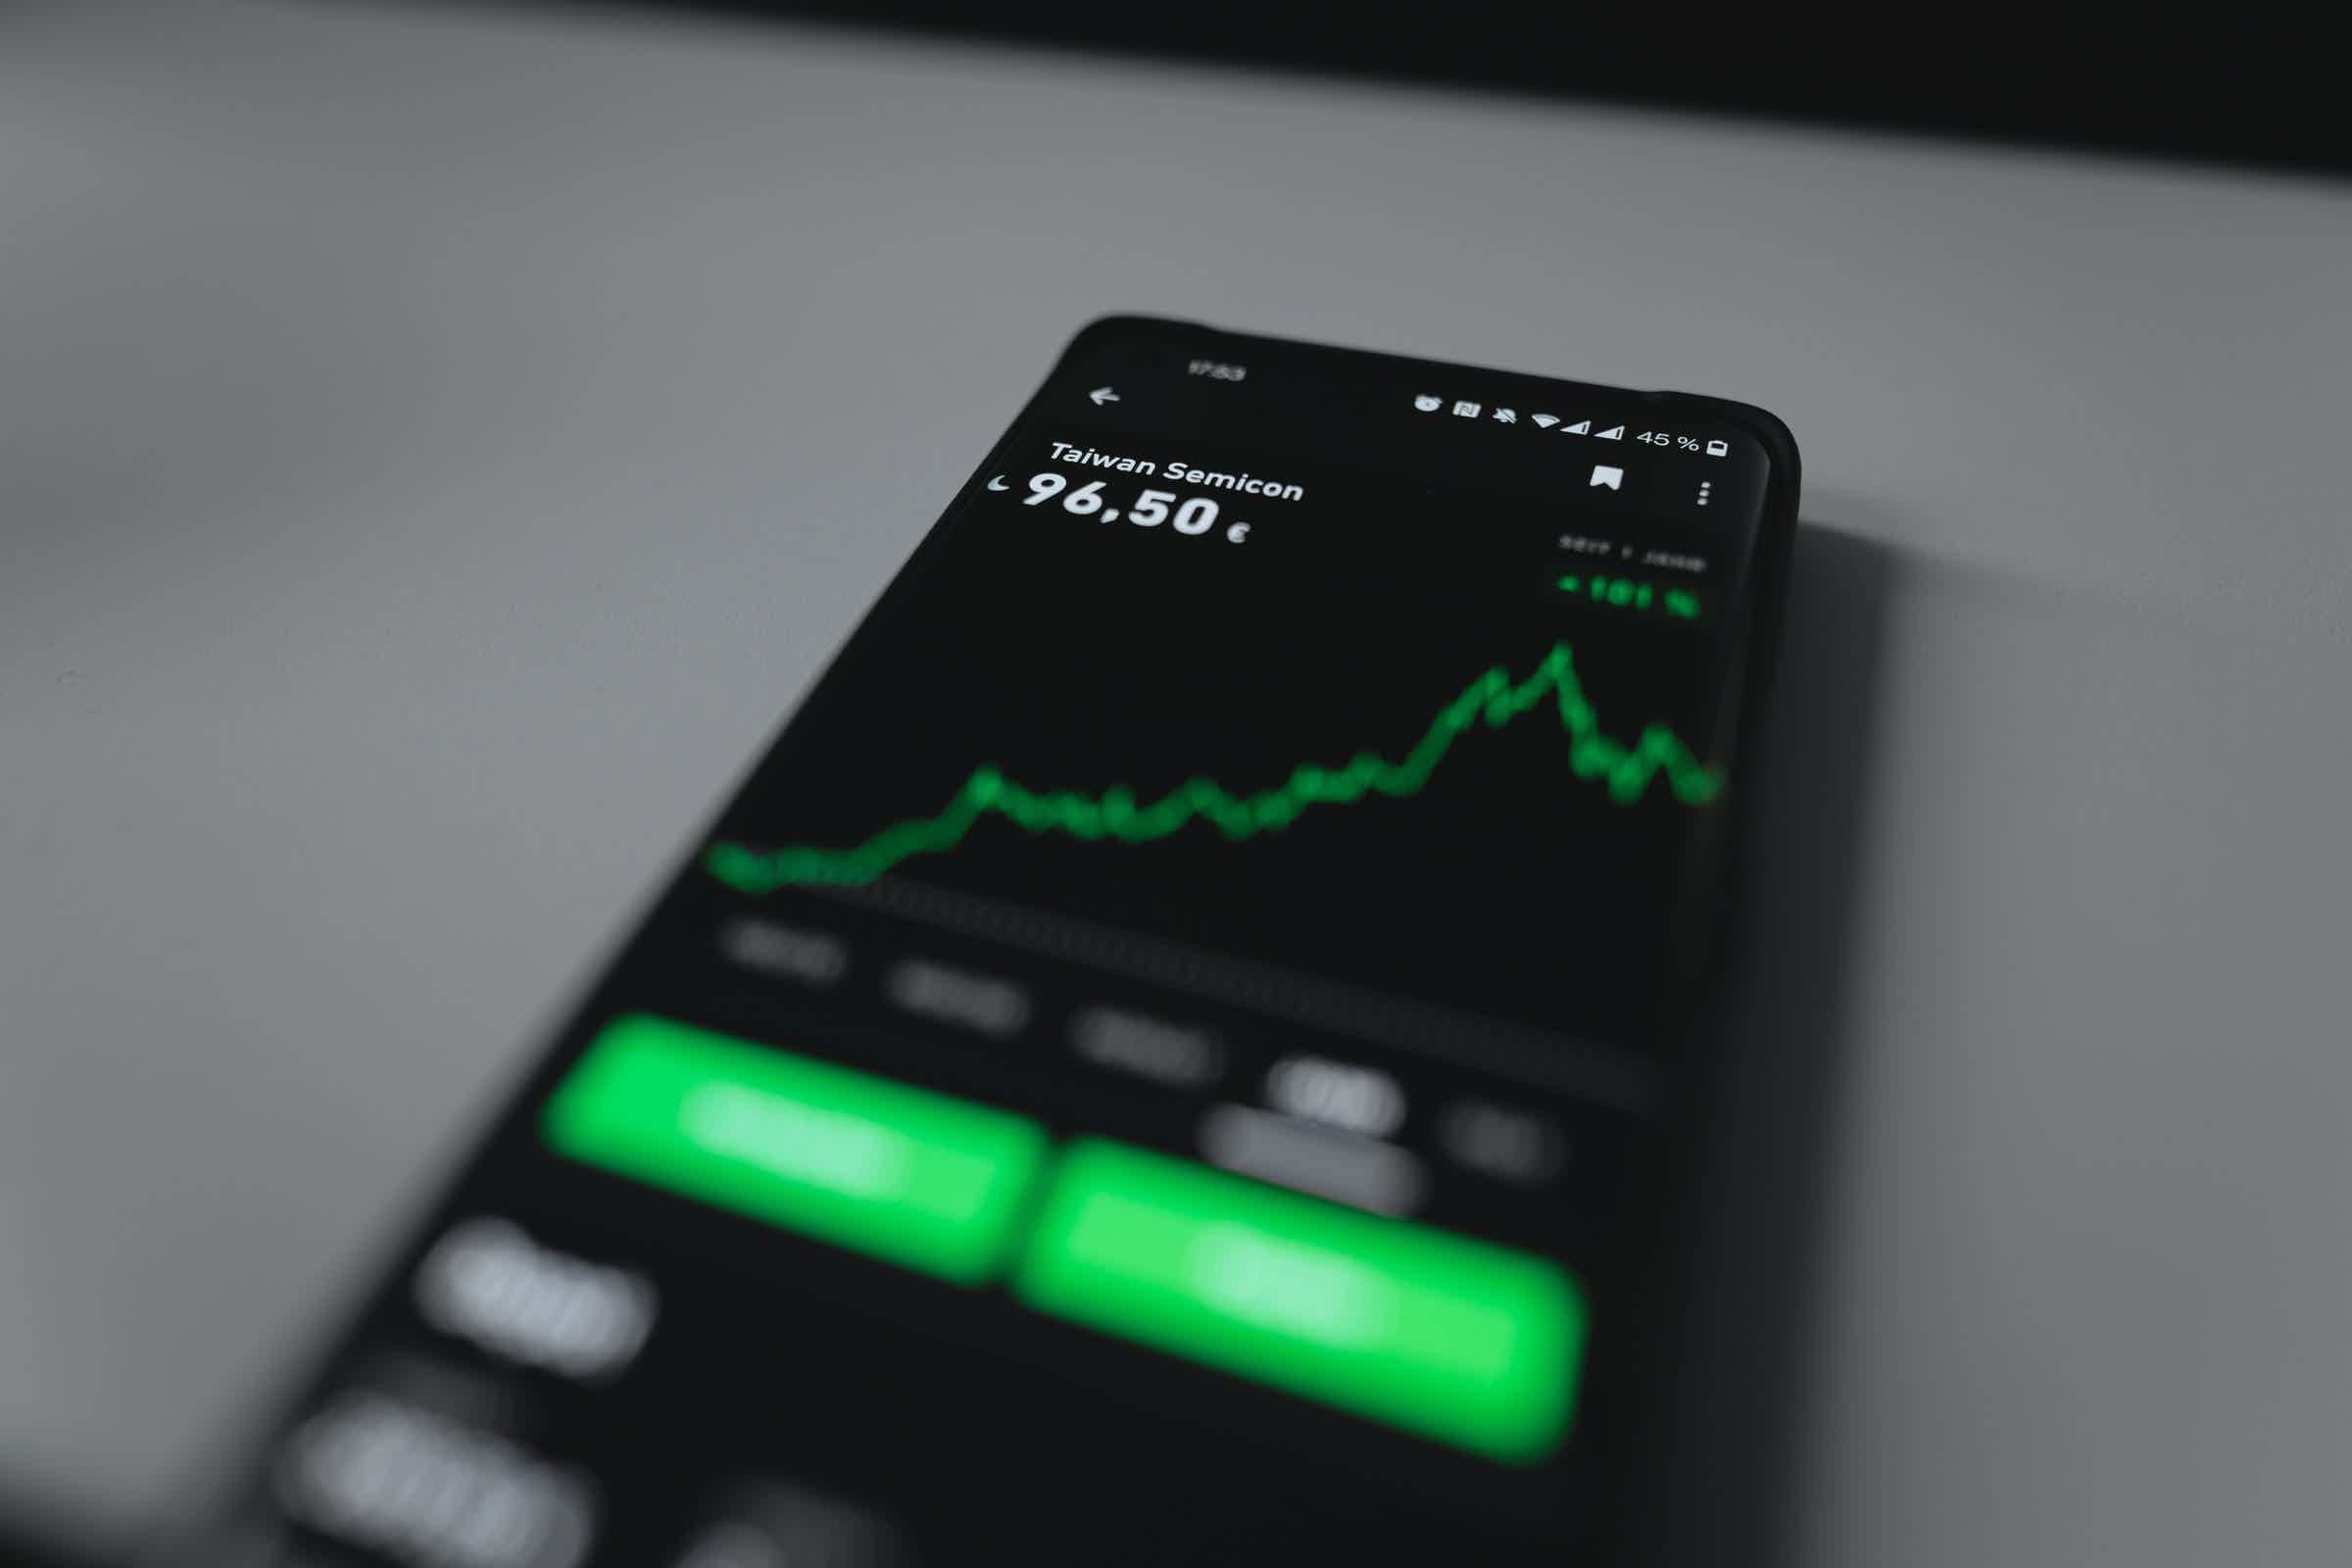 Find out which one of these online brokers is best: J.P. Morgan Self-Directed or Robinhood Investing! Source: Unsplash.